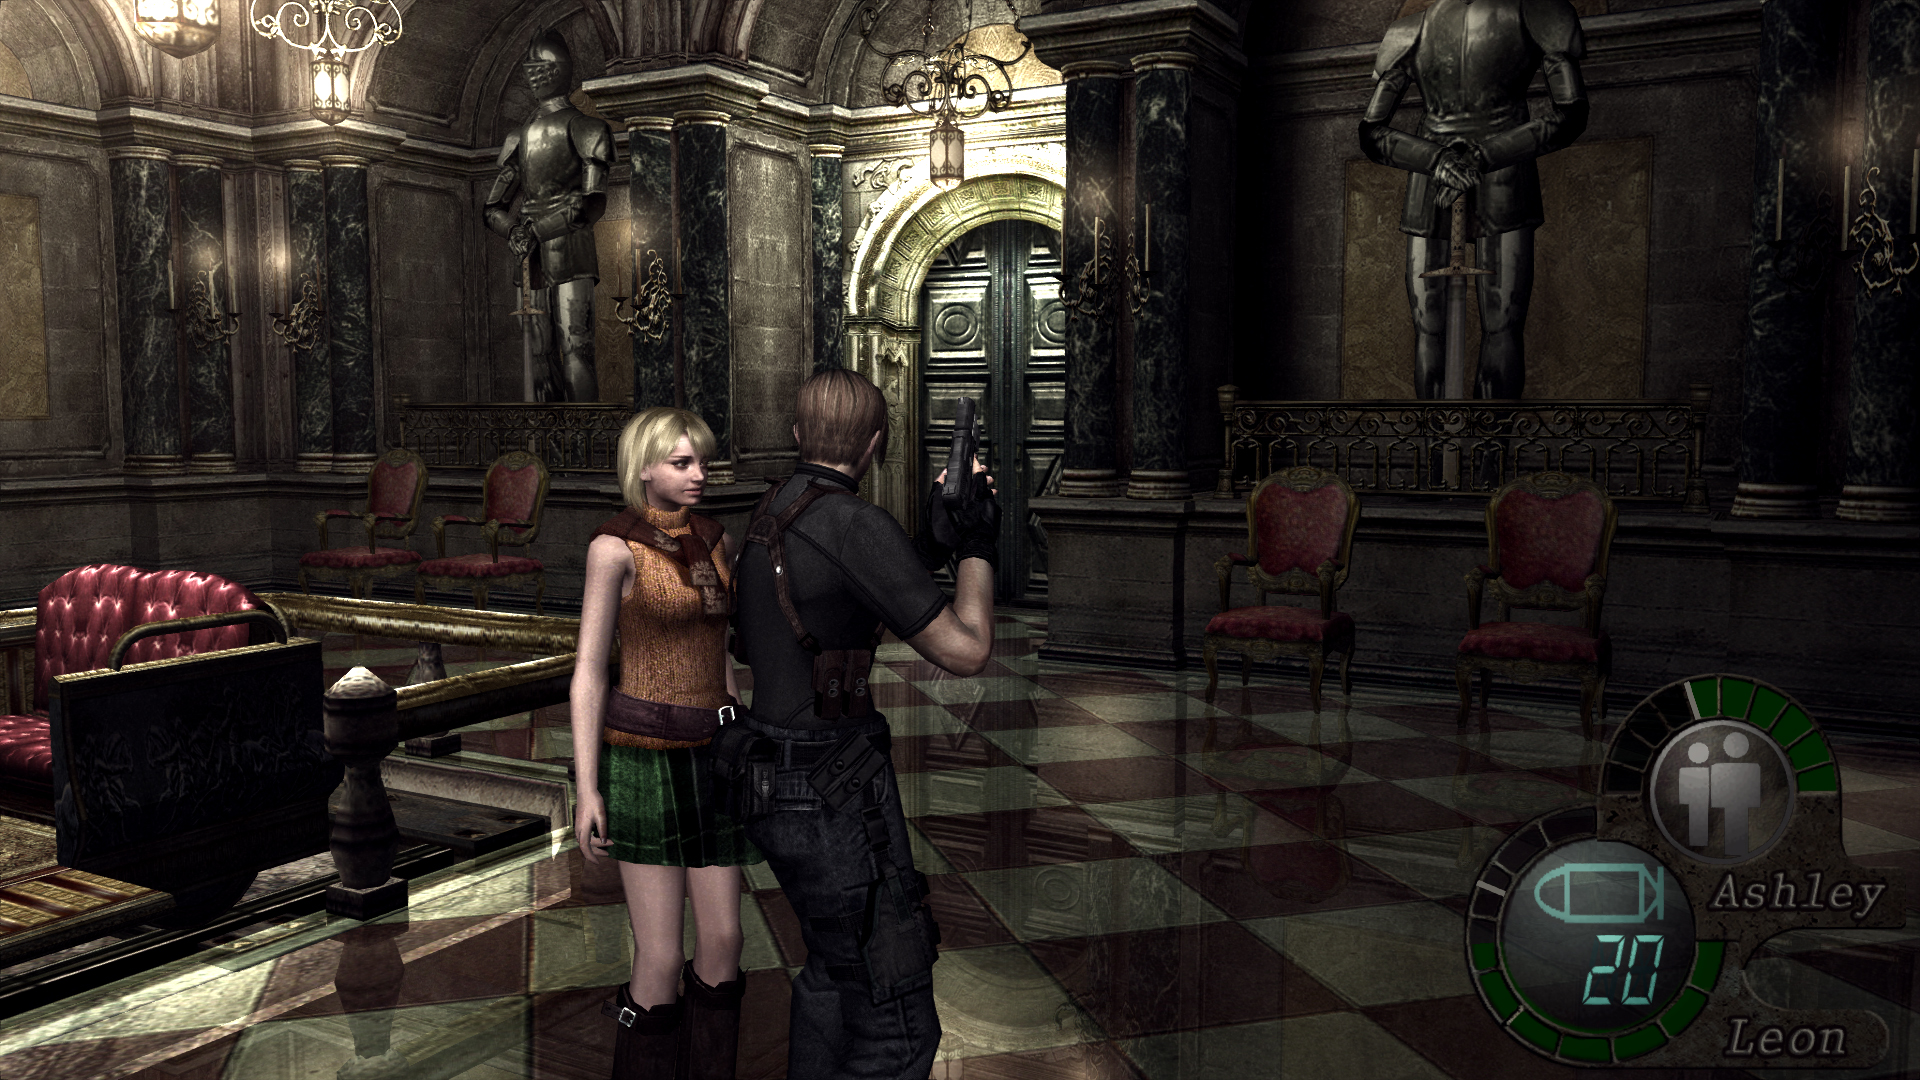 Steam resident evil 4 ultimate hd фото 93